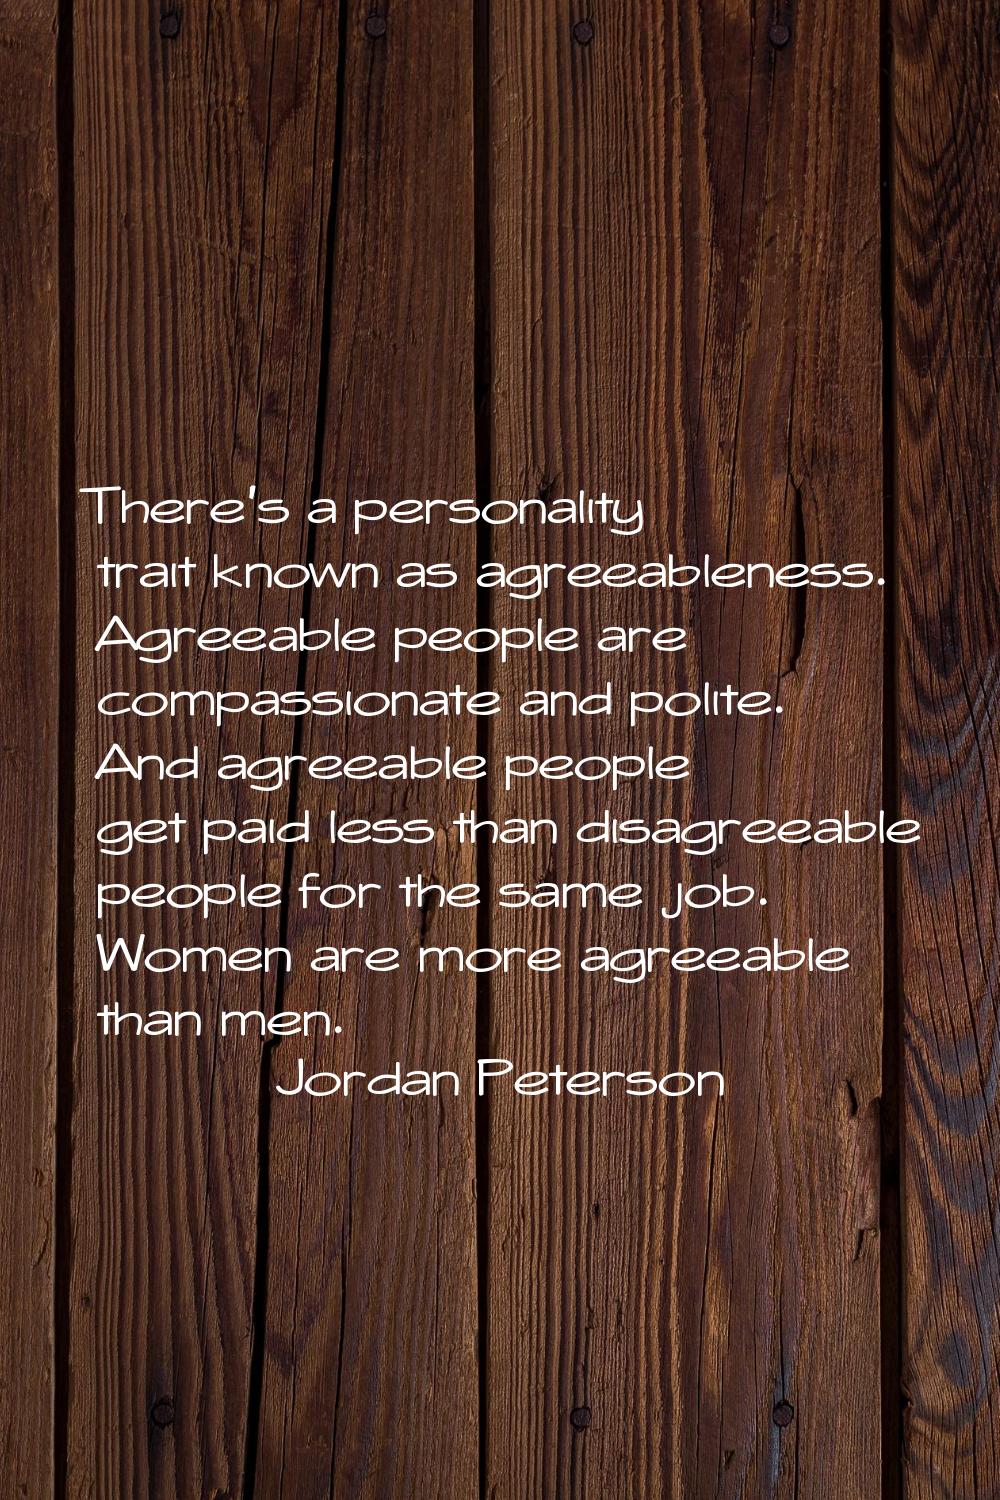 There's a personality trait known as agreeableness. Agreeable people are compassionate and polite. 